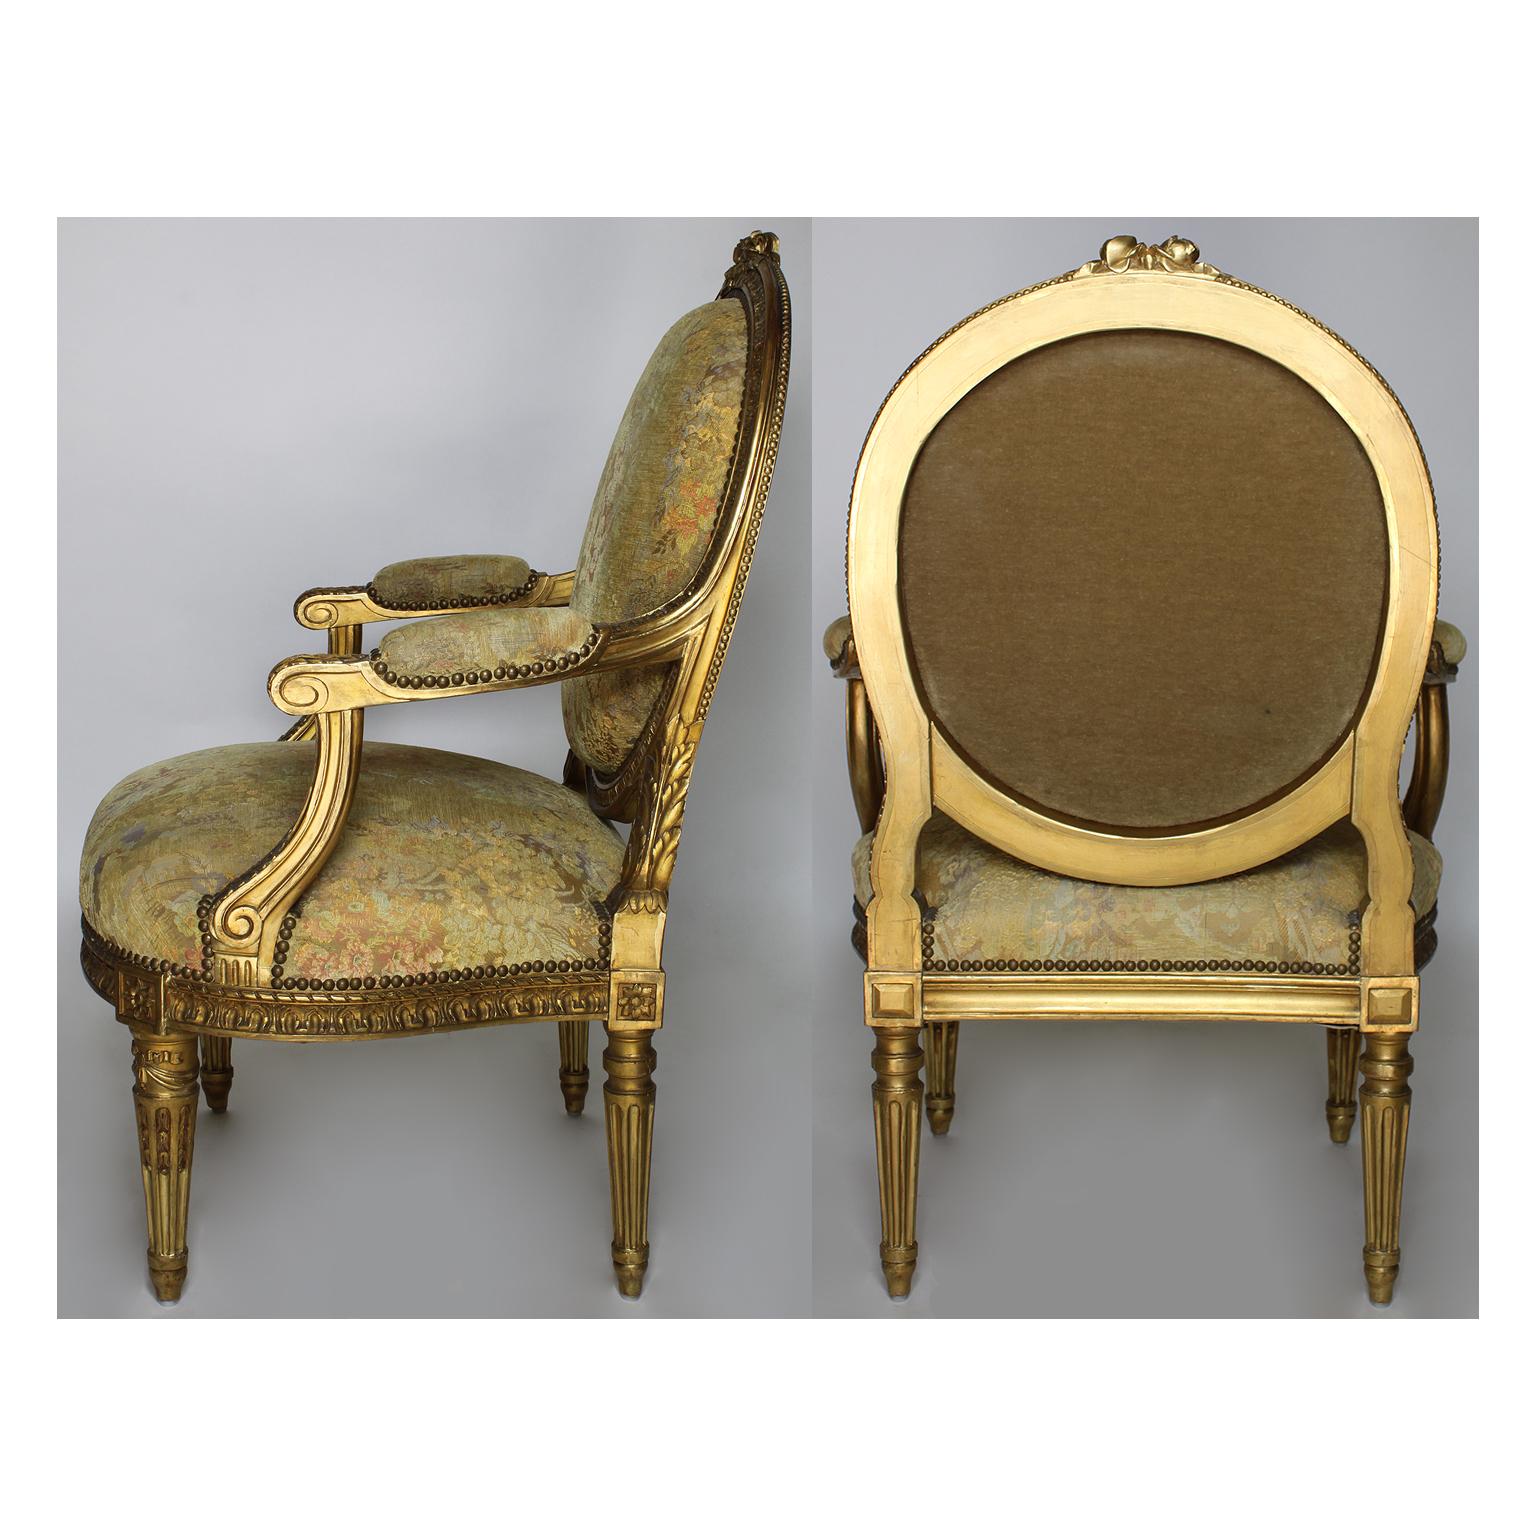 Fine French 19th Century Louis XVI Style Giltwood Carved Five-Piece Salon Suite For Sale 14